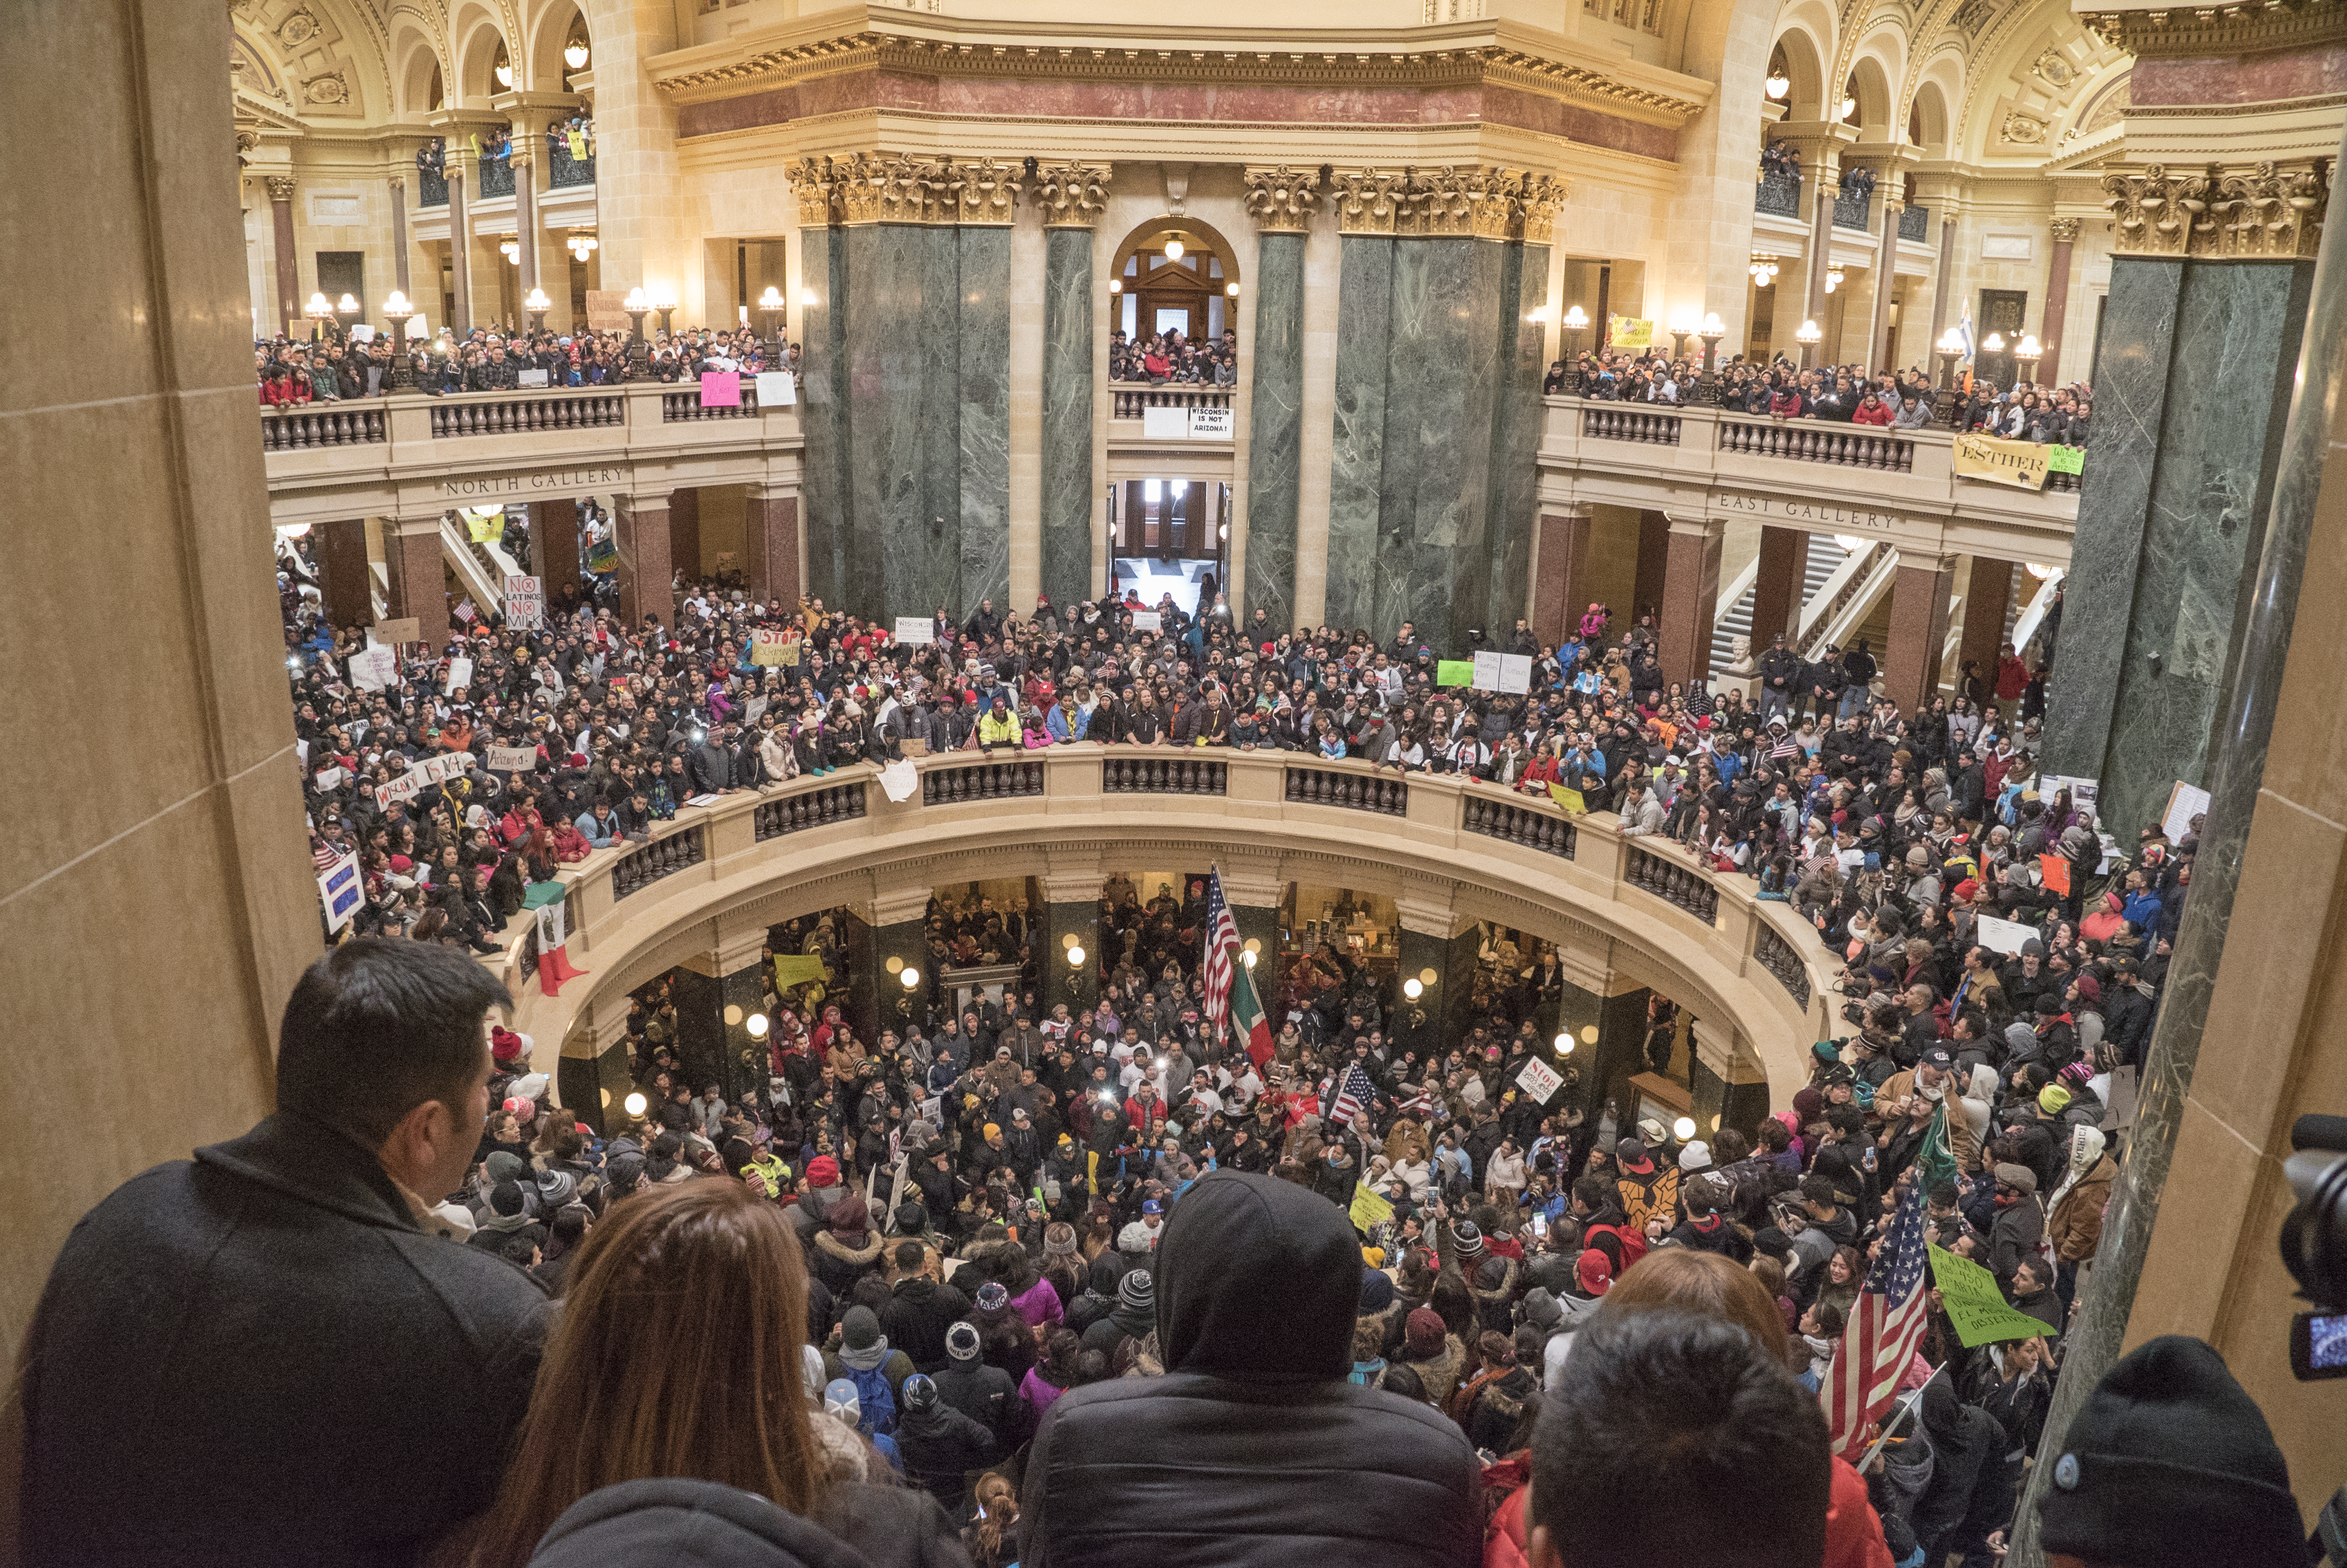 Thousands of people crowding the State Capitol rotunda